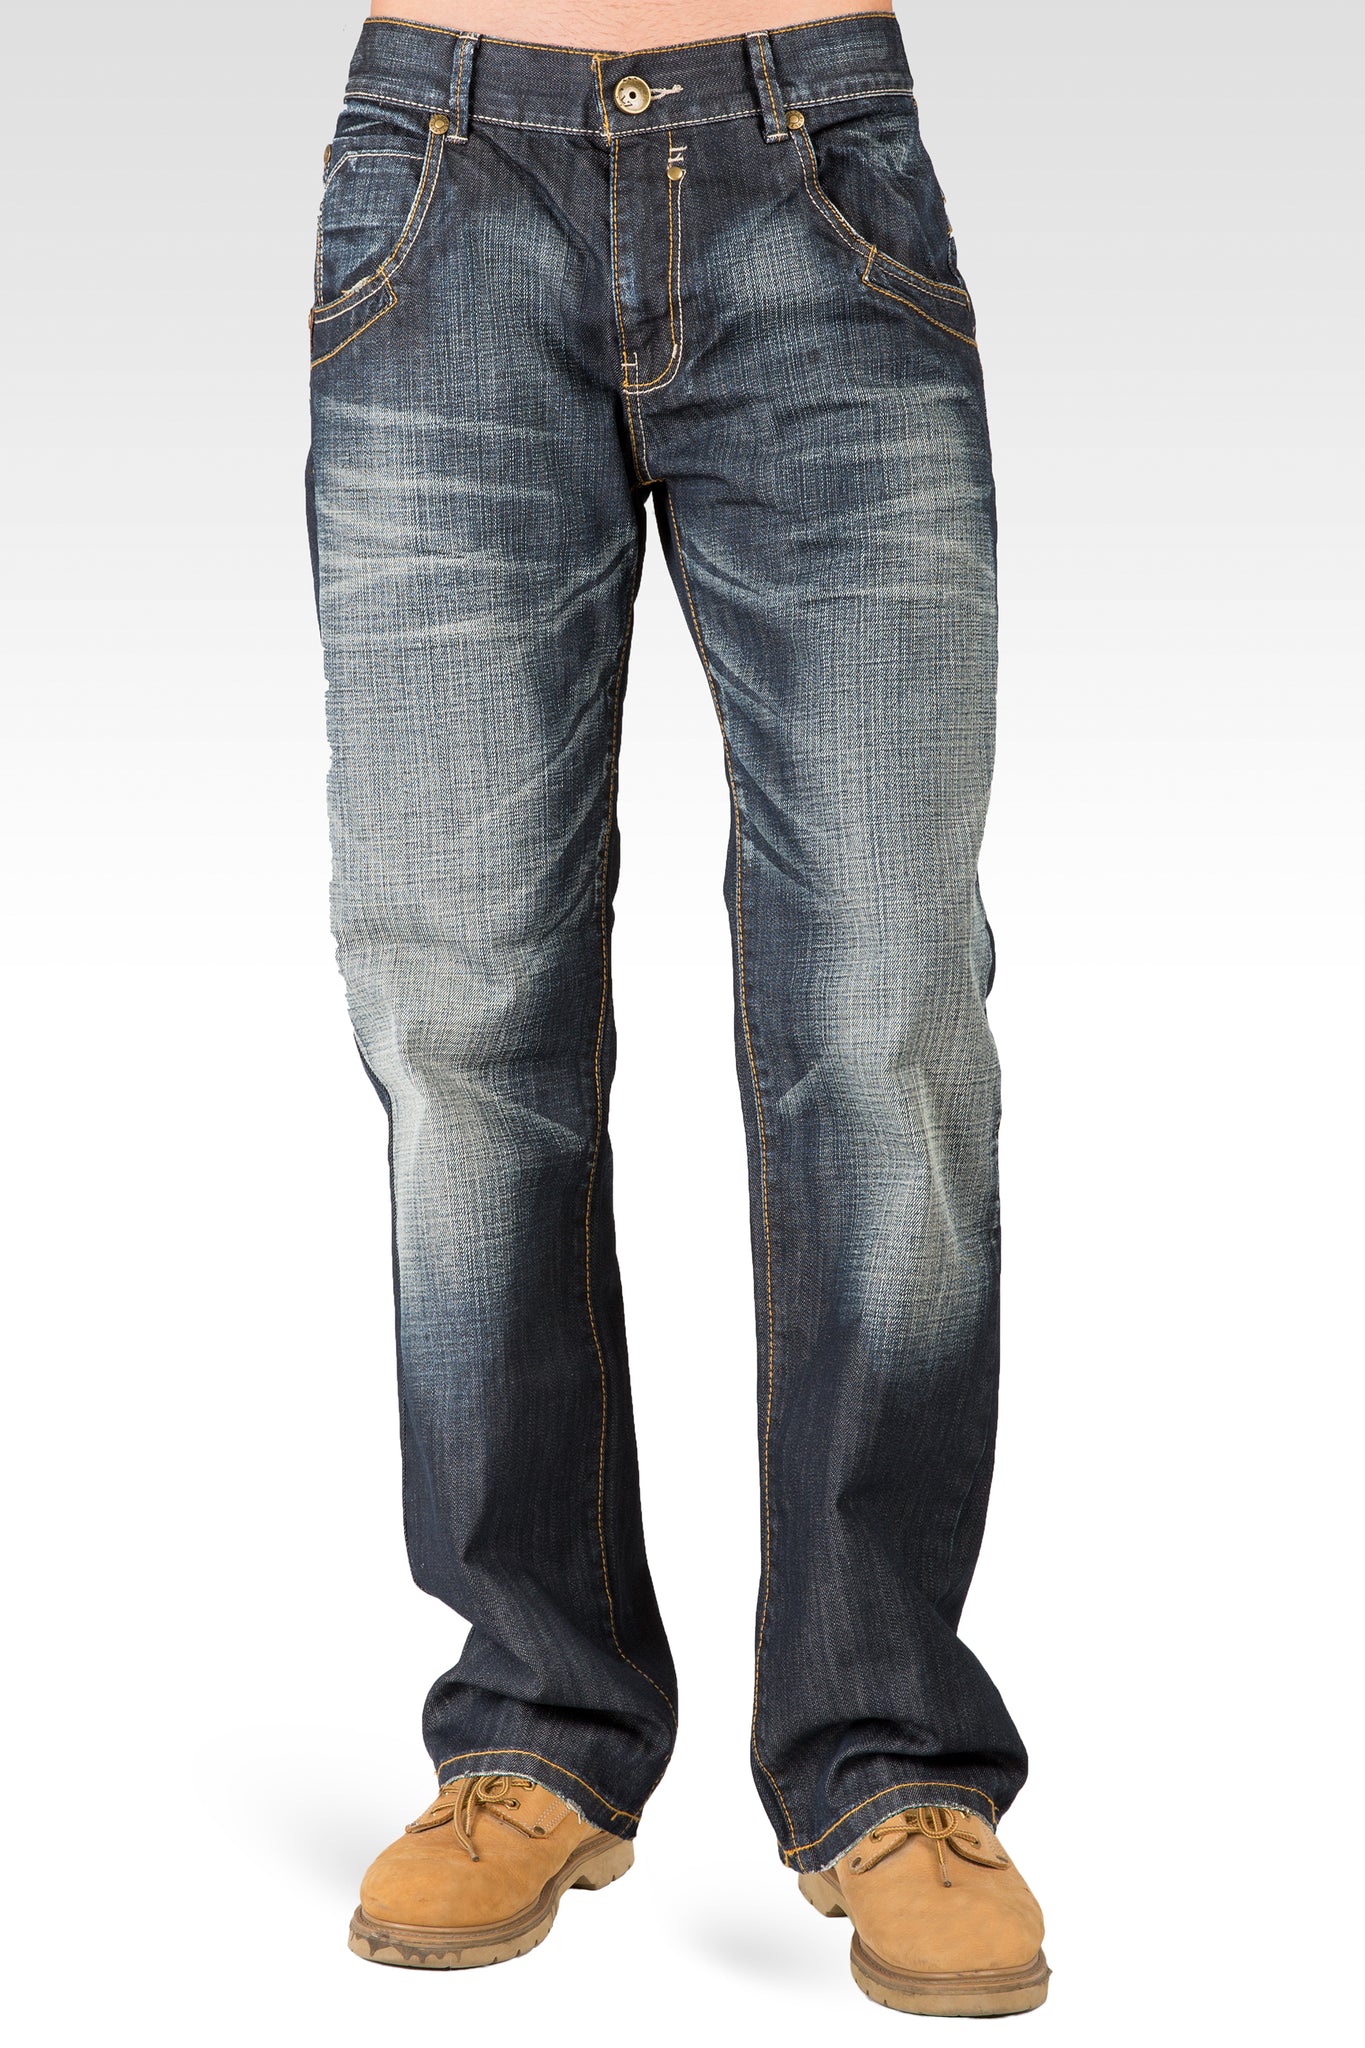 Level 7 Men's Whisker Hand-Sanded Zip Pockets Relaxed Bootcut Jeans ...